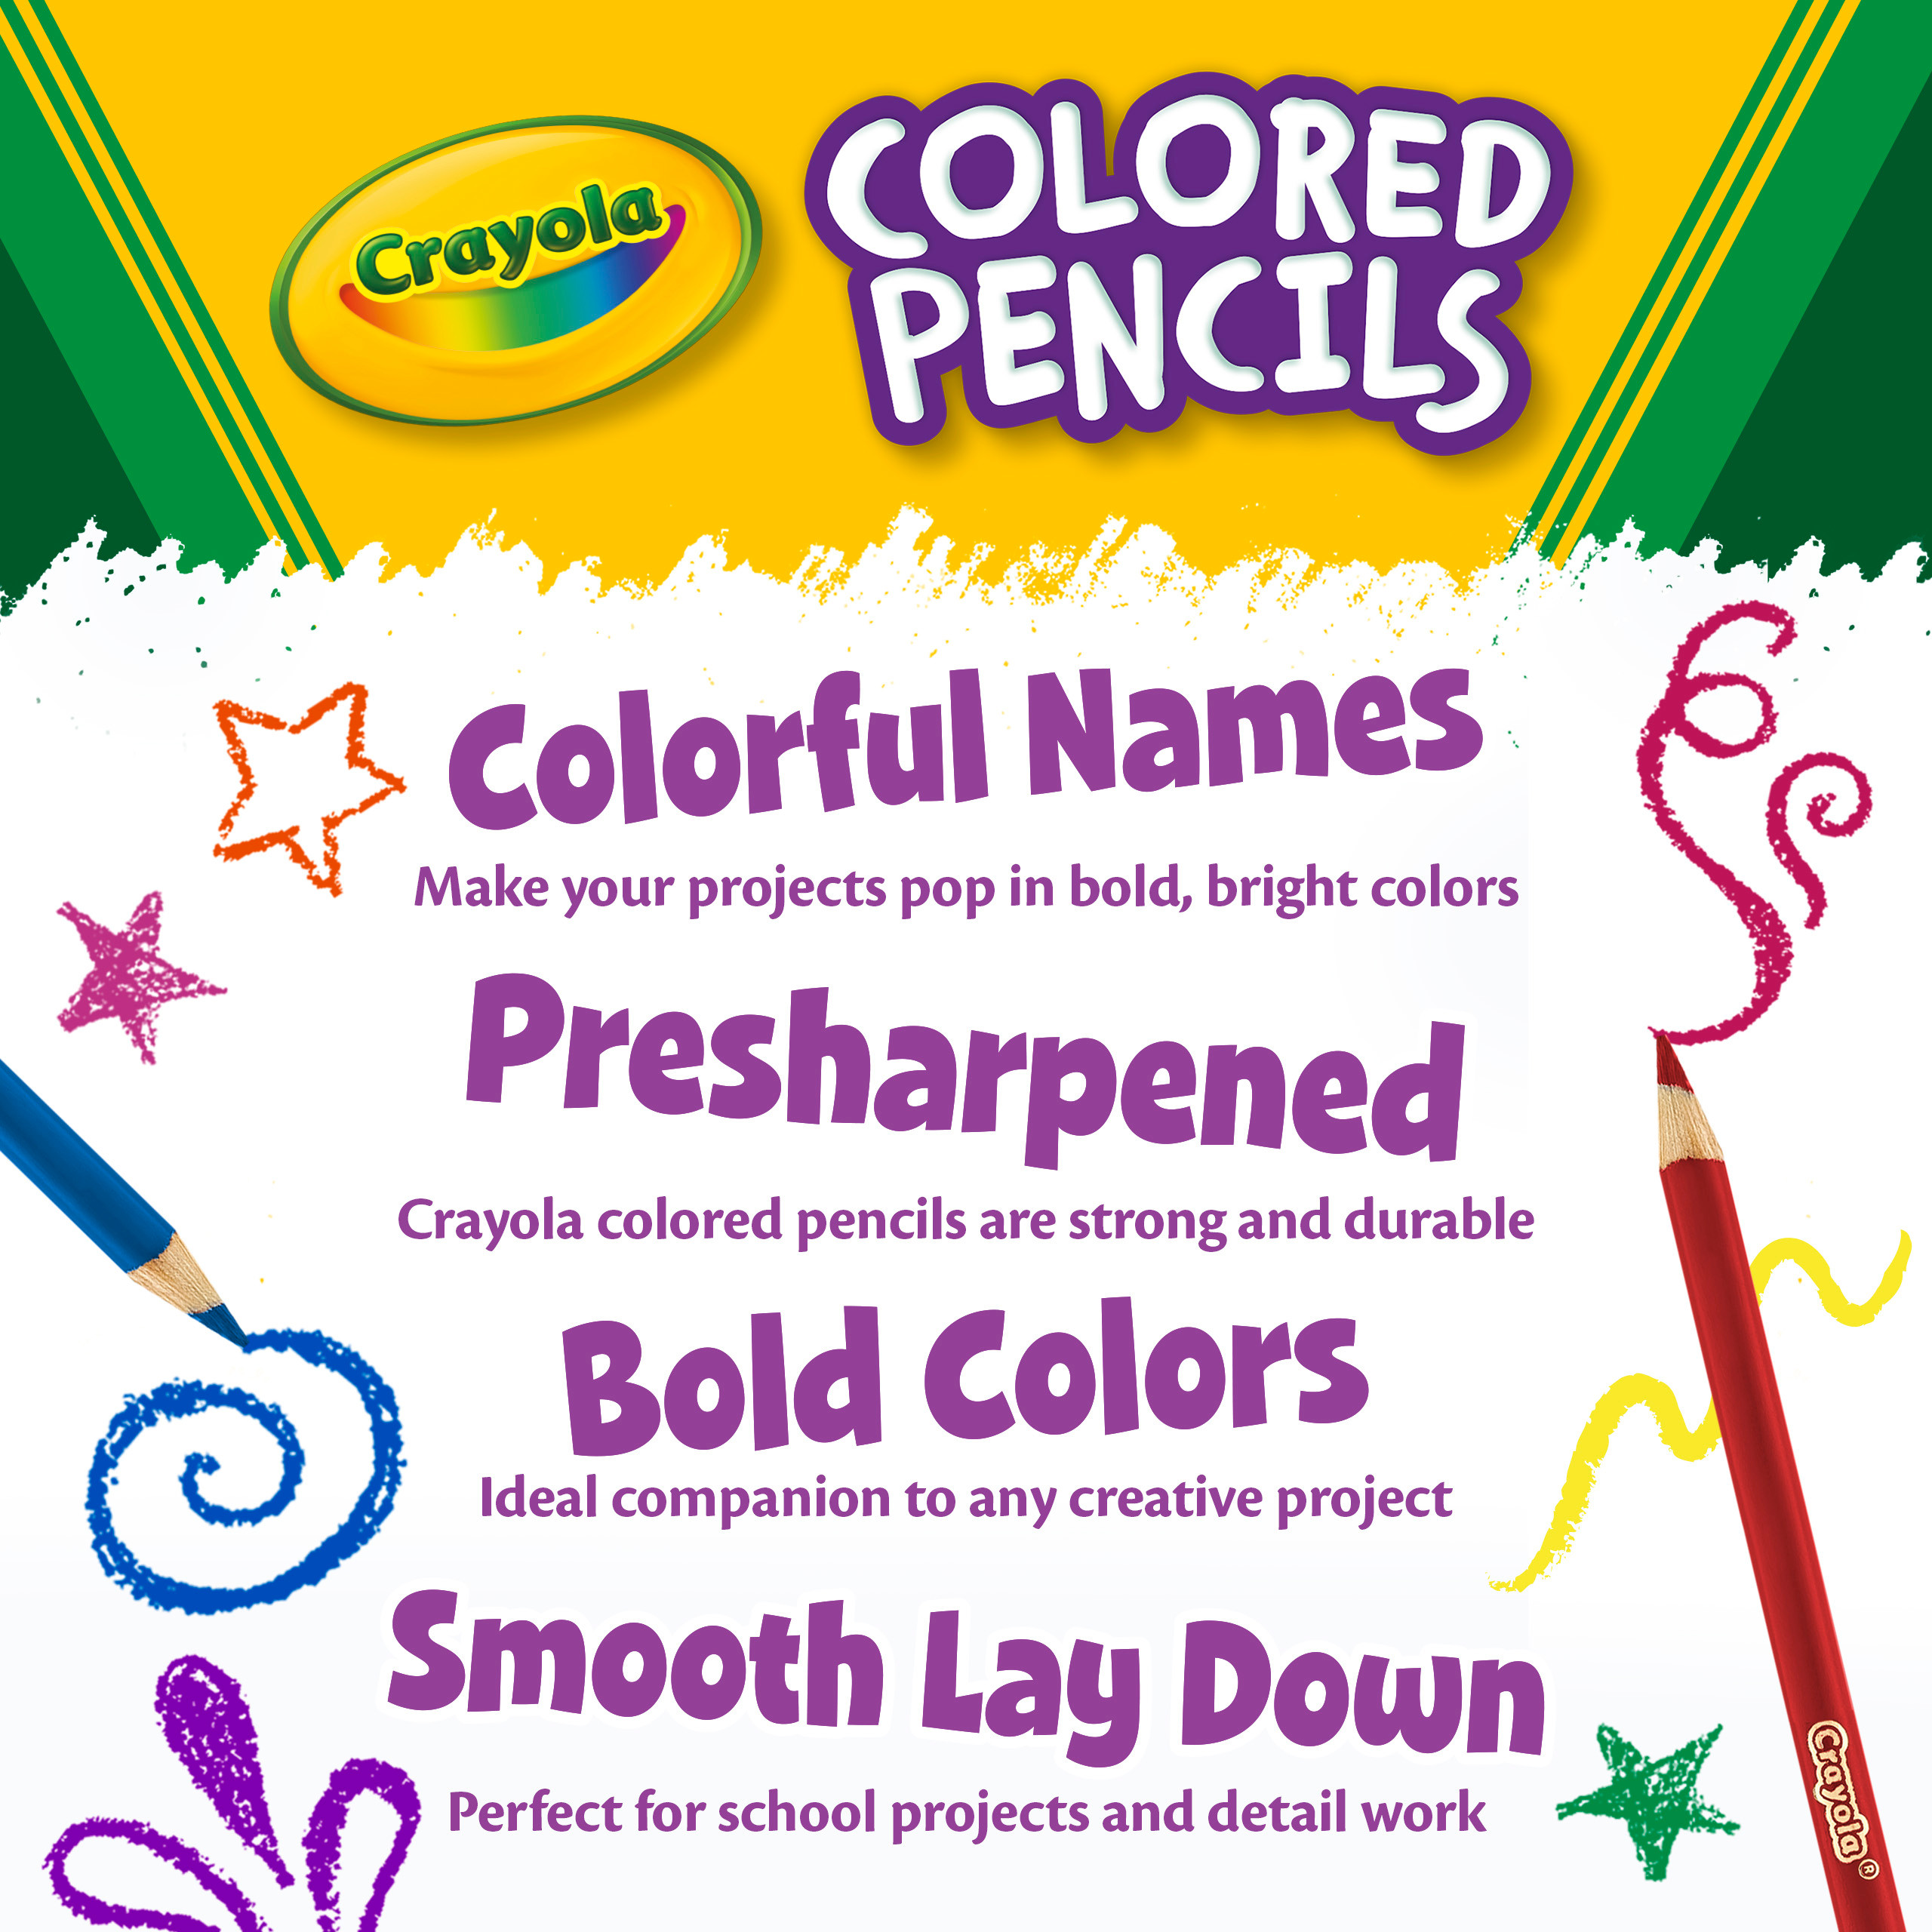 Crayola Colored Pencils, Assorted Colors, Pre-sharpened, Adult Coloring, 24 Count - image 6 of 8